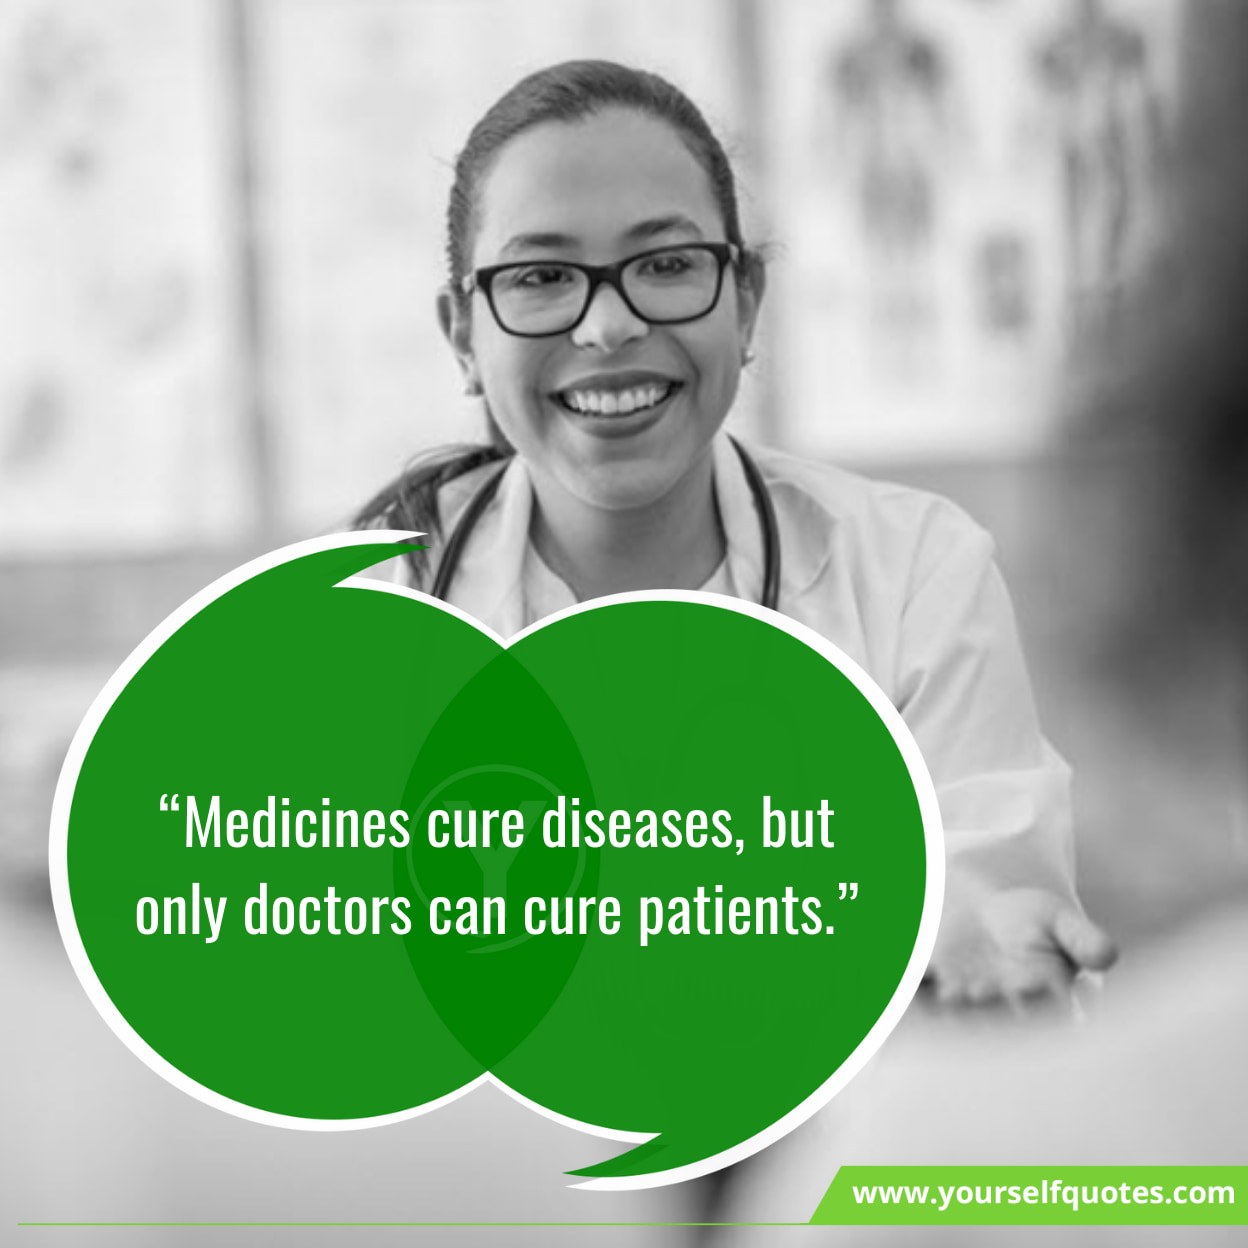 Inspirational Quotes On Doctors' Day 